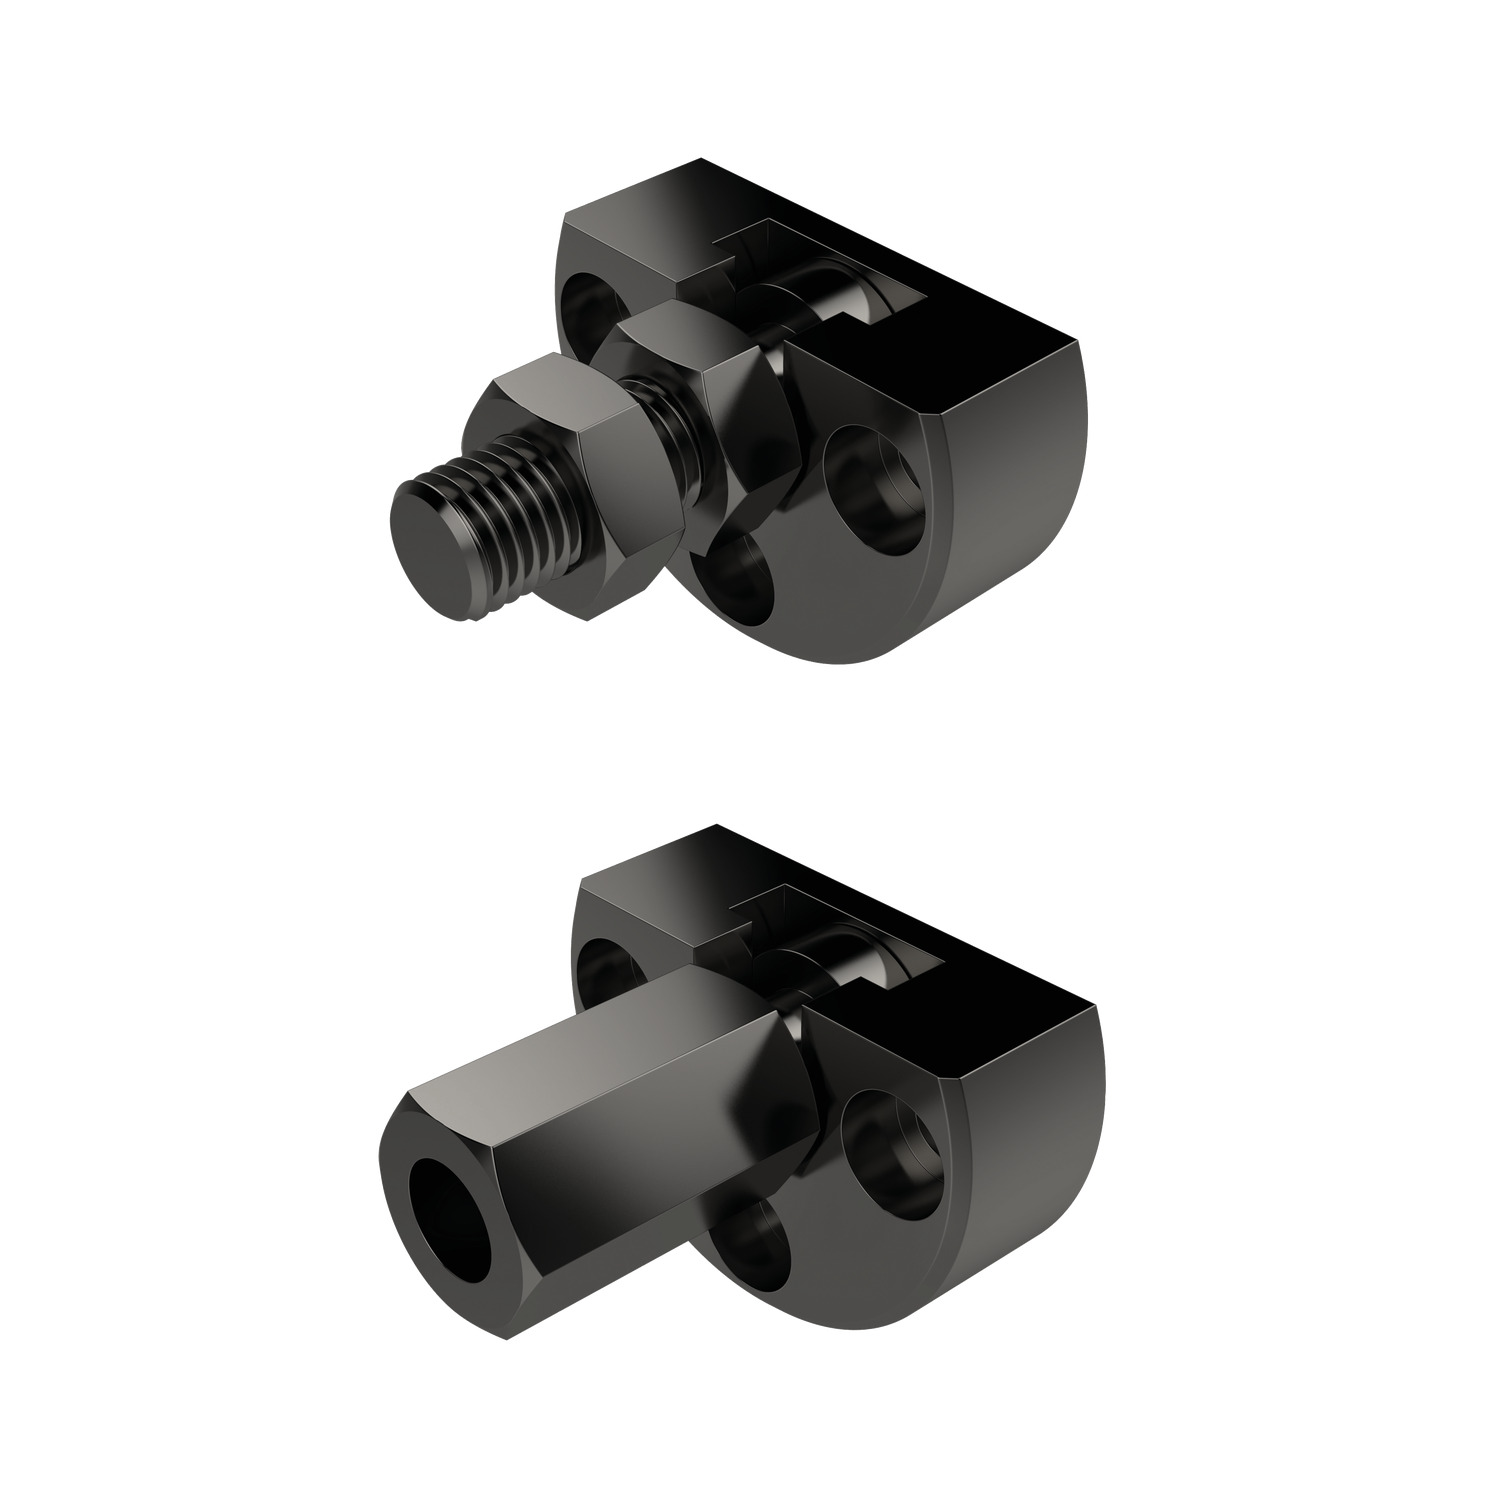 Quick Plug Couplings Screwed flange quick plug couplings made from heat treated steel. In built radial offset feature.